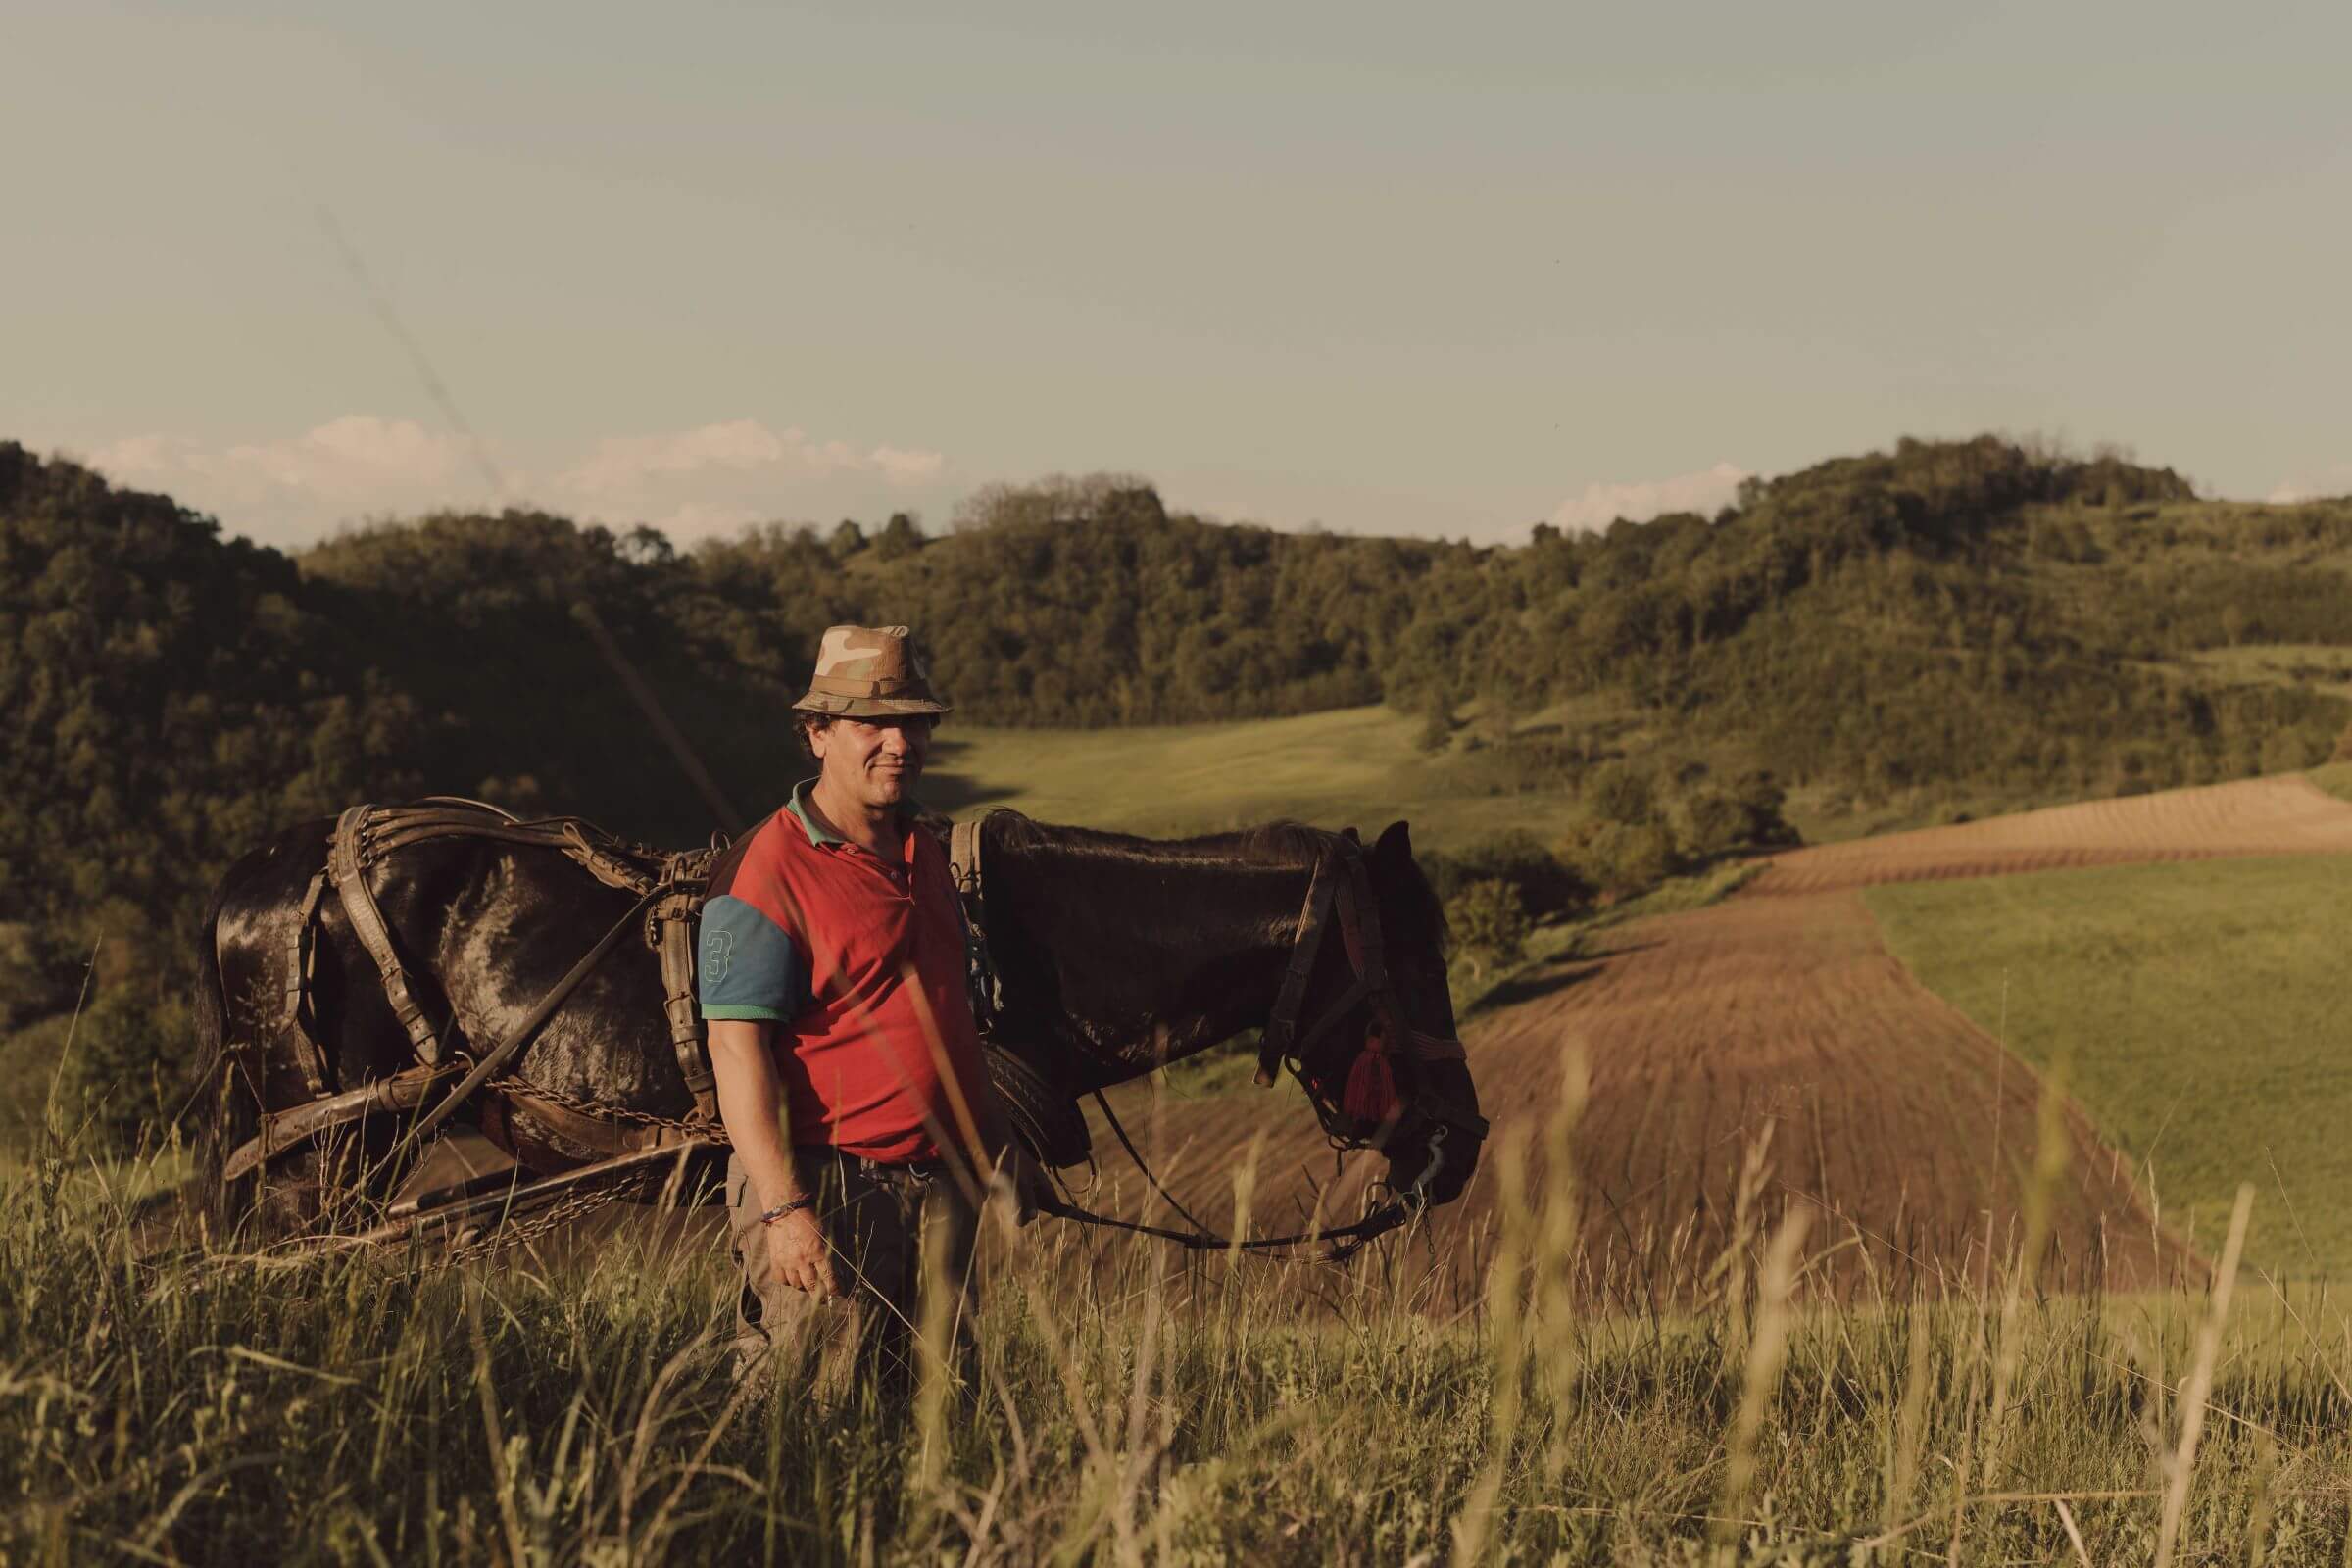 Paolo, an owner of Copsa Mare Guesthouses where Slow Cyclists stay in Transylvania, in the field with his horse and cart